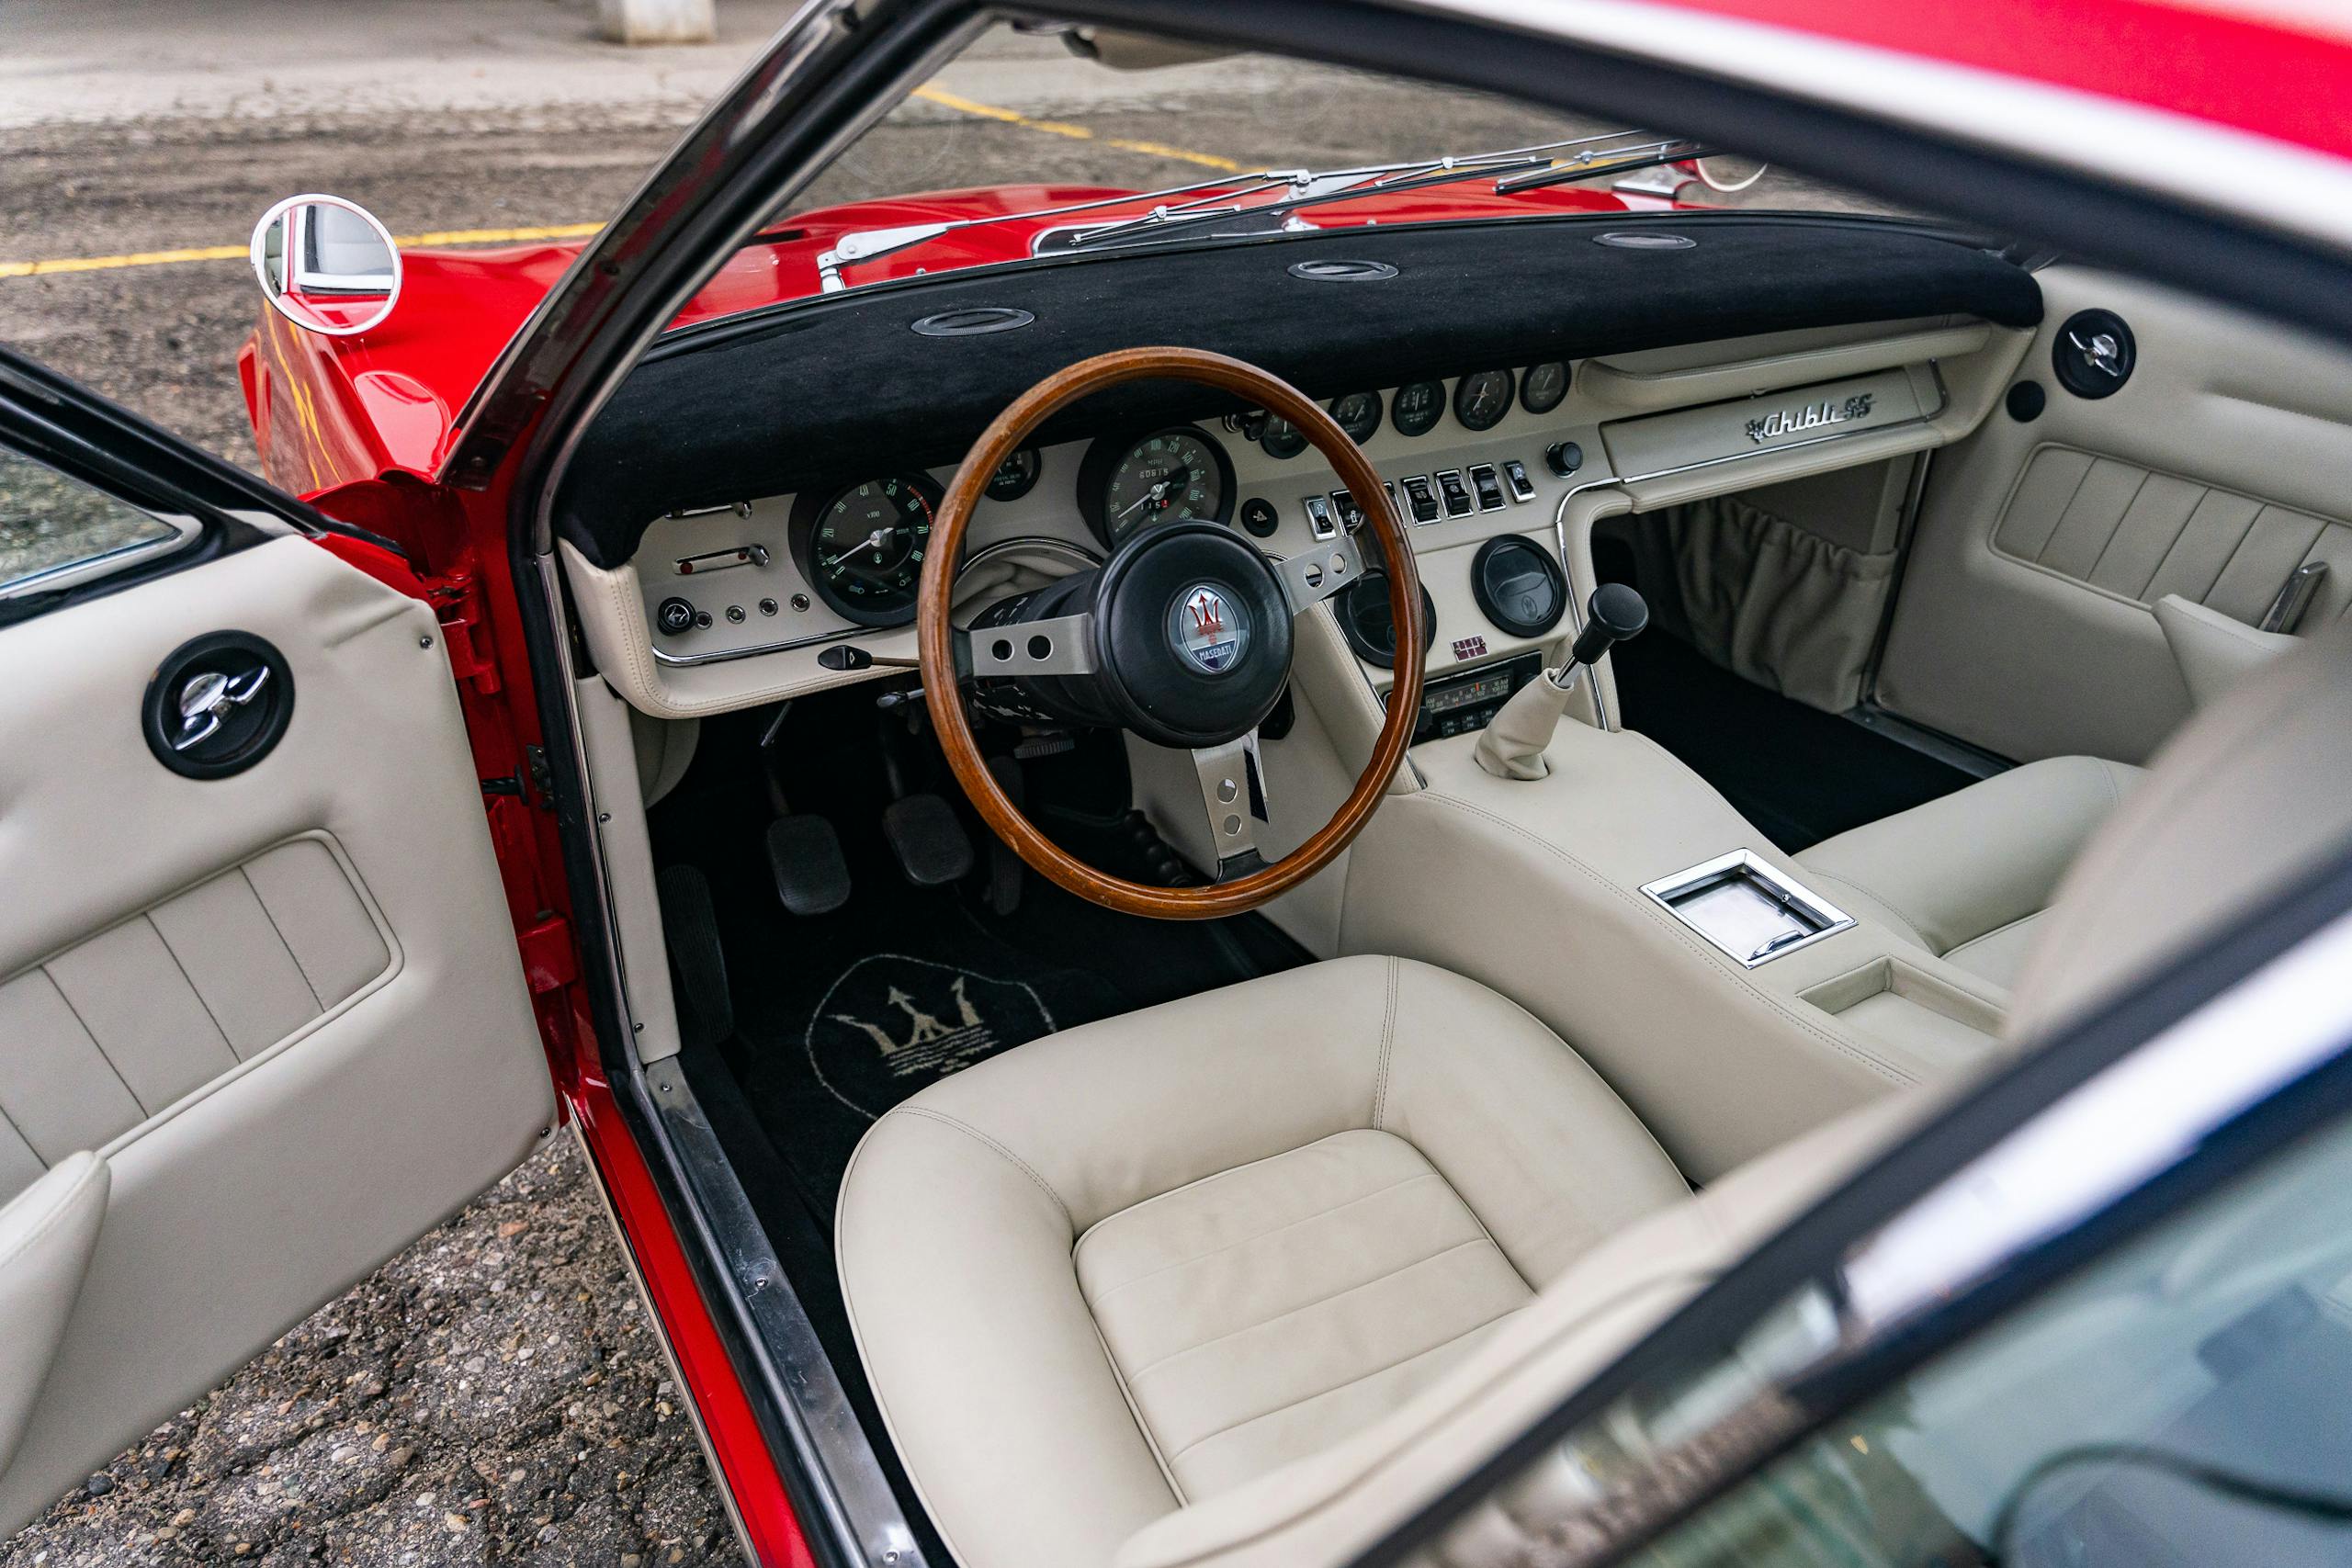 Ghibli SS 4-9 Coupe interior